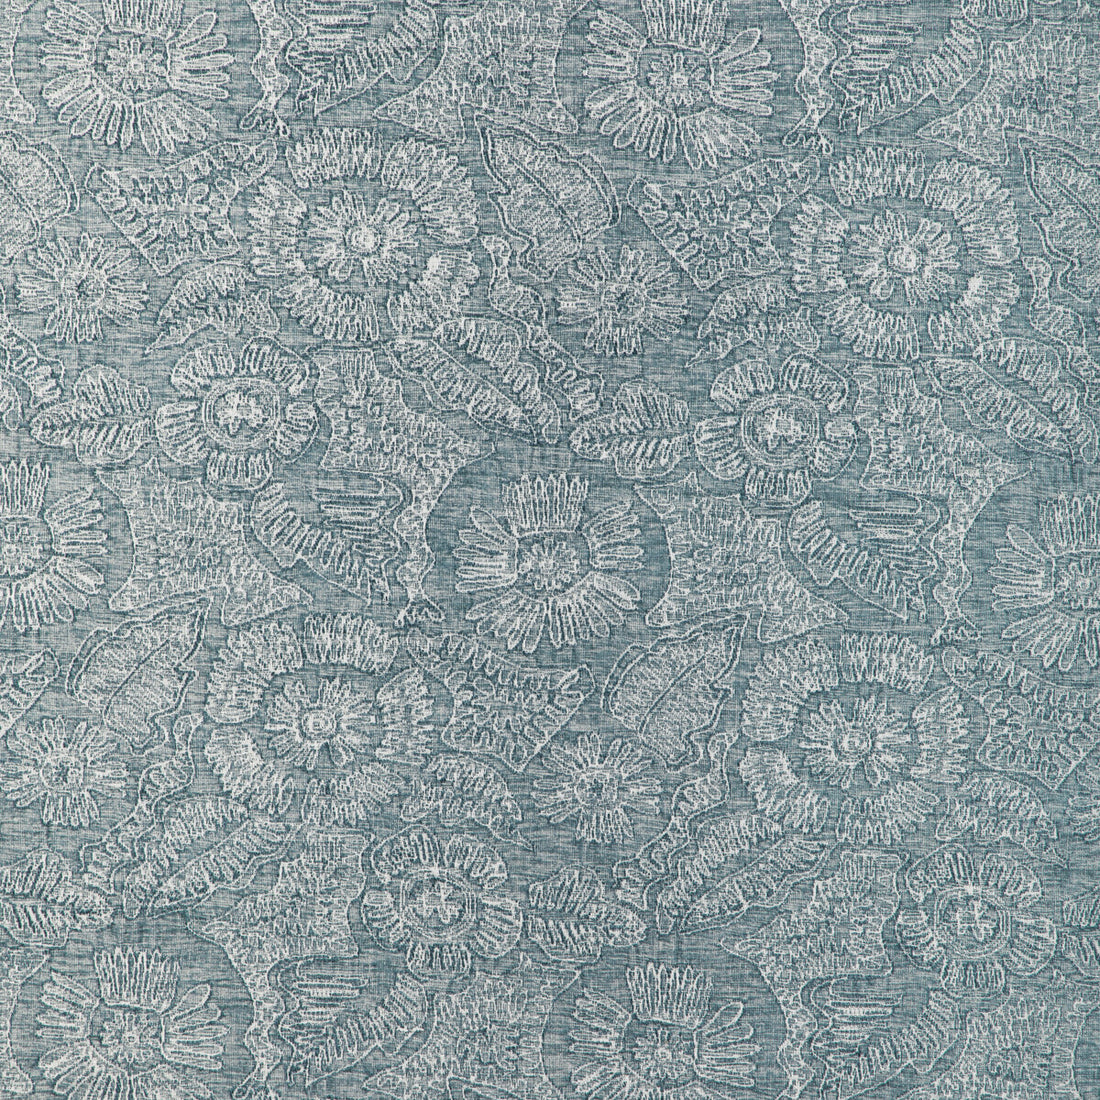 Chenille Bloom fabric in sky color - pattern 36889.5.0 - by Kravet Couture in the Atelier Weaves collection